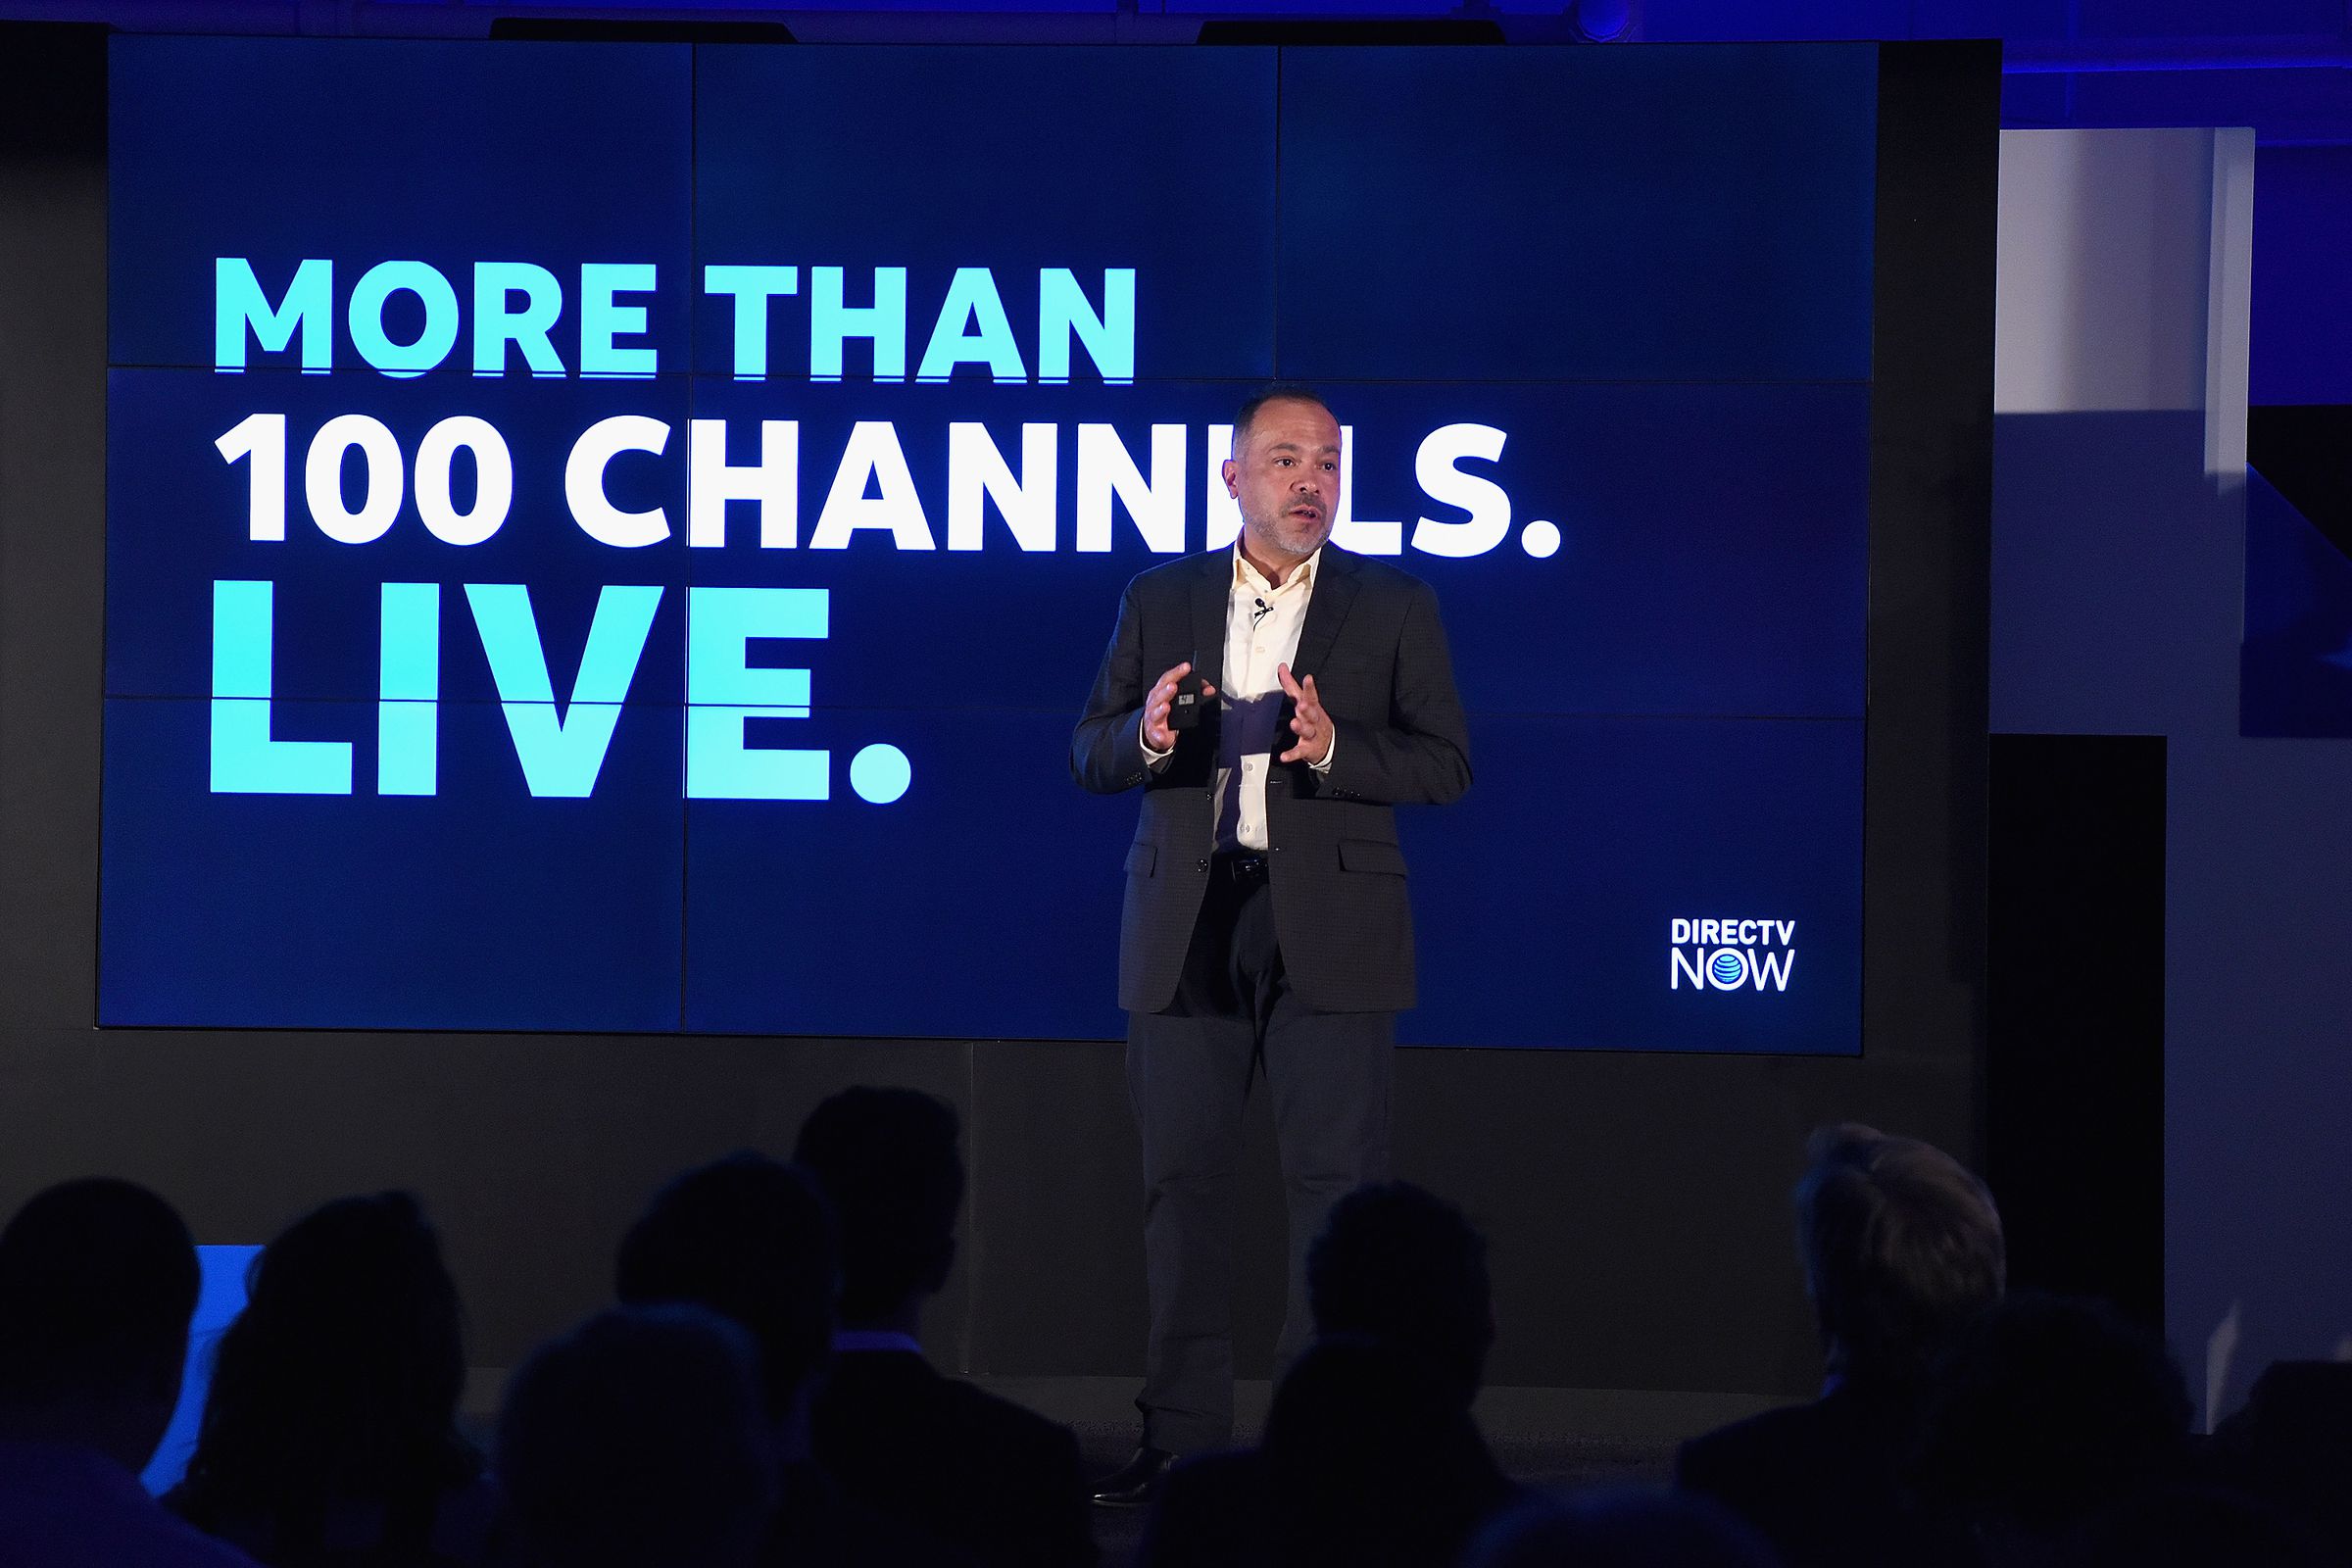 AT&T Celebrates the Launch of DIRECTV NOW